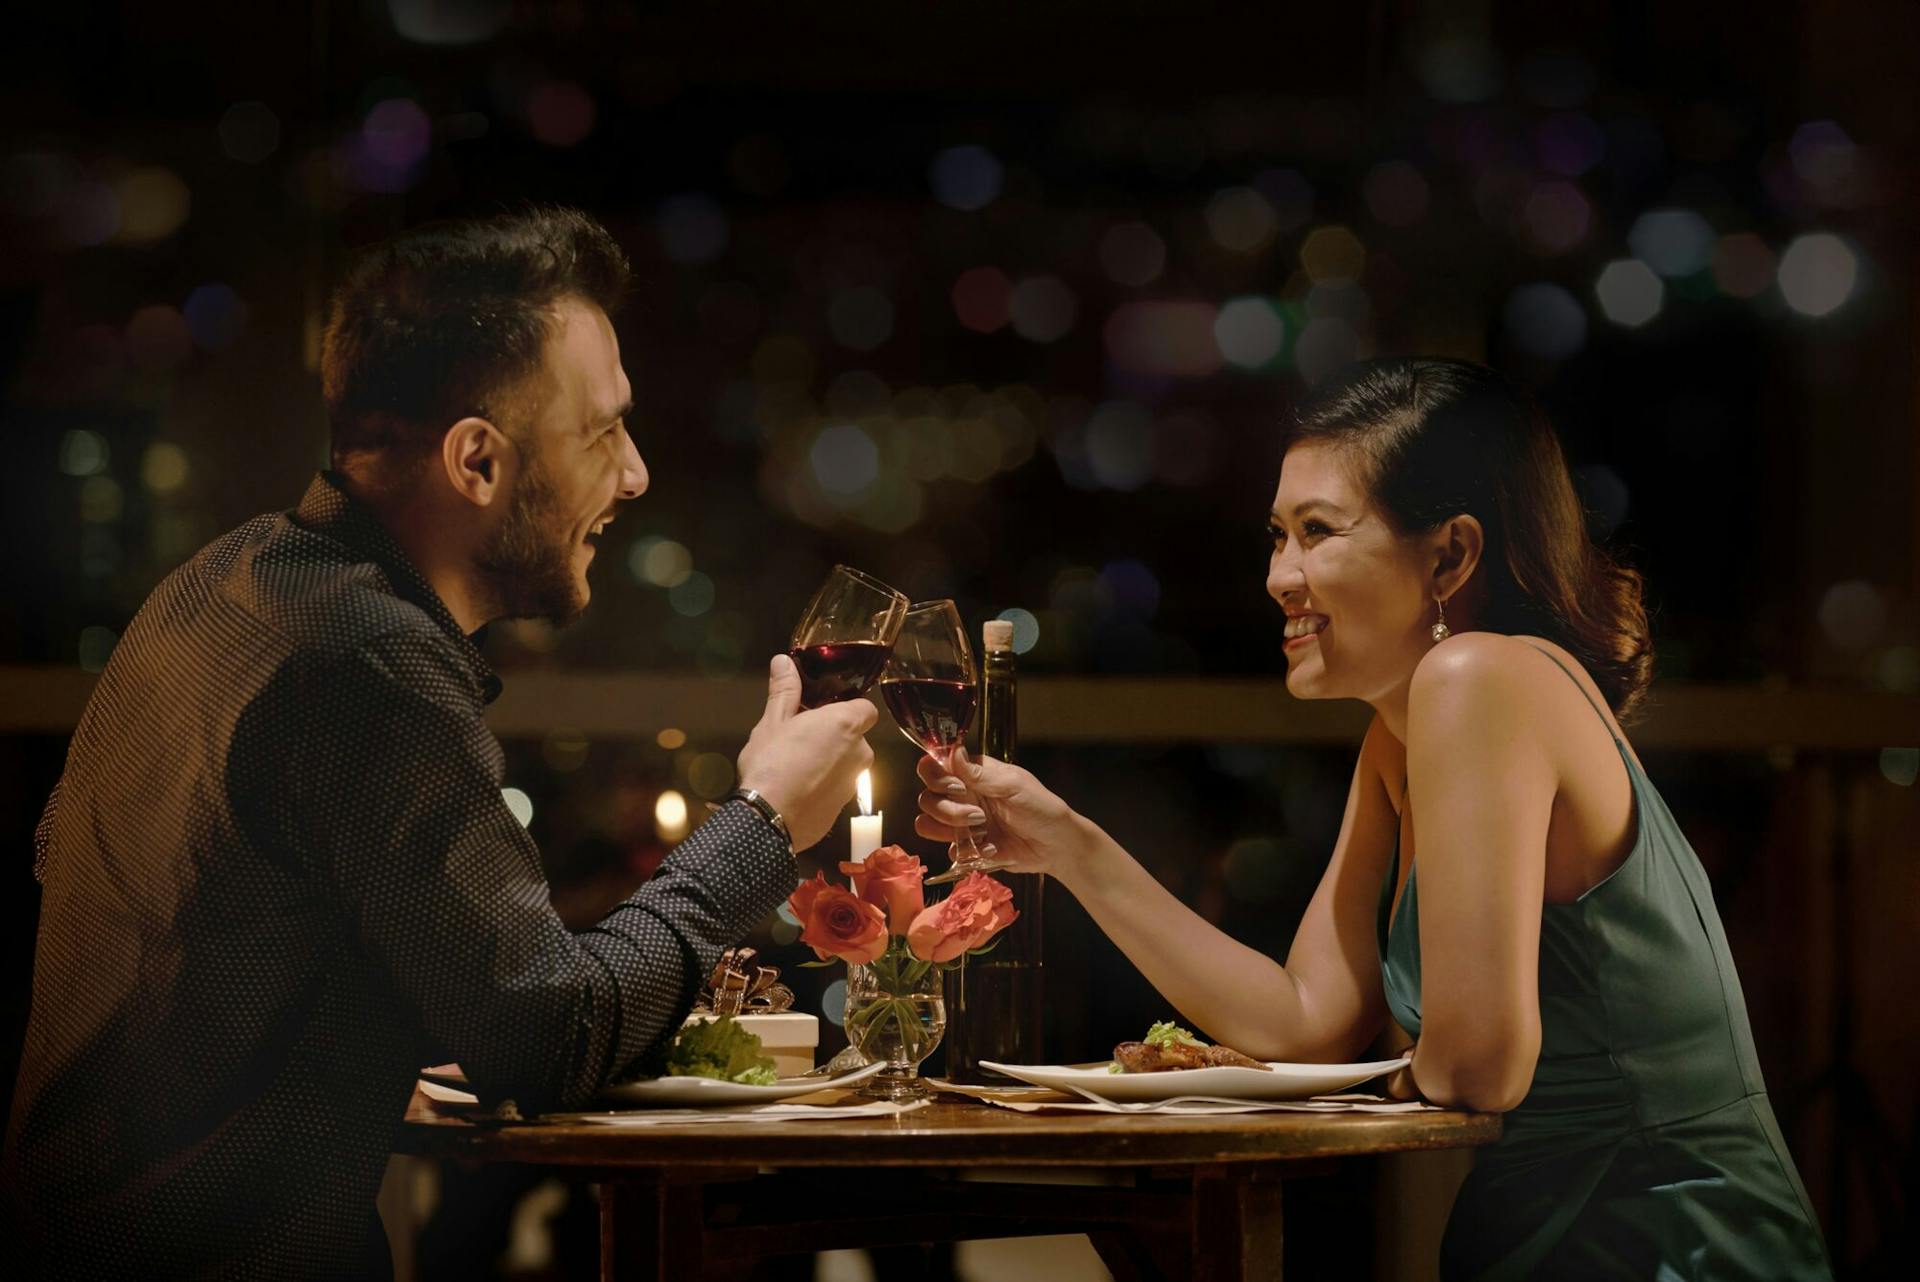 Reservations, Service & Experience Among Top Motivators of the U.S. Date Night Dining Scene